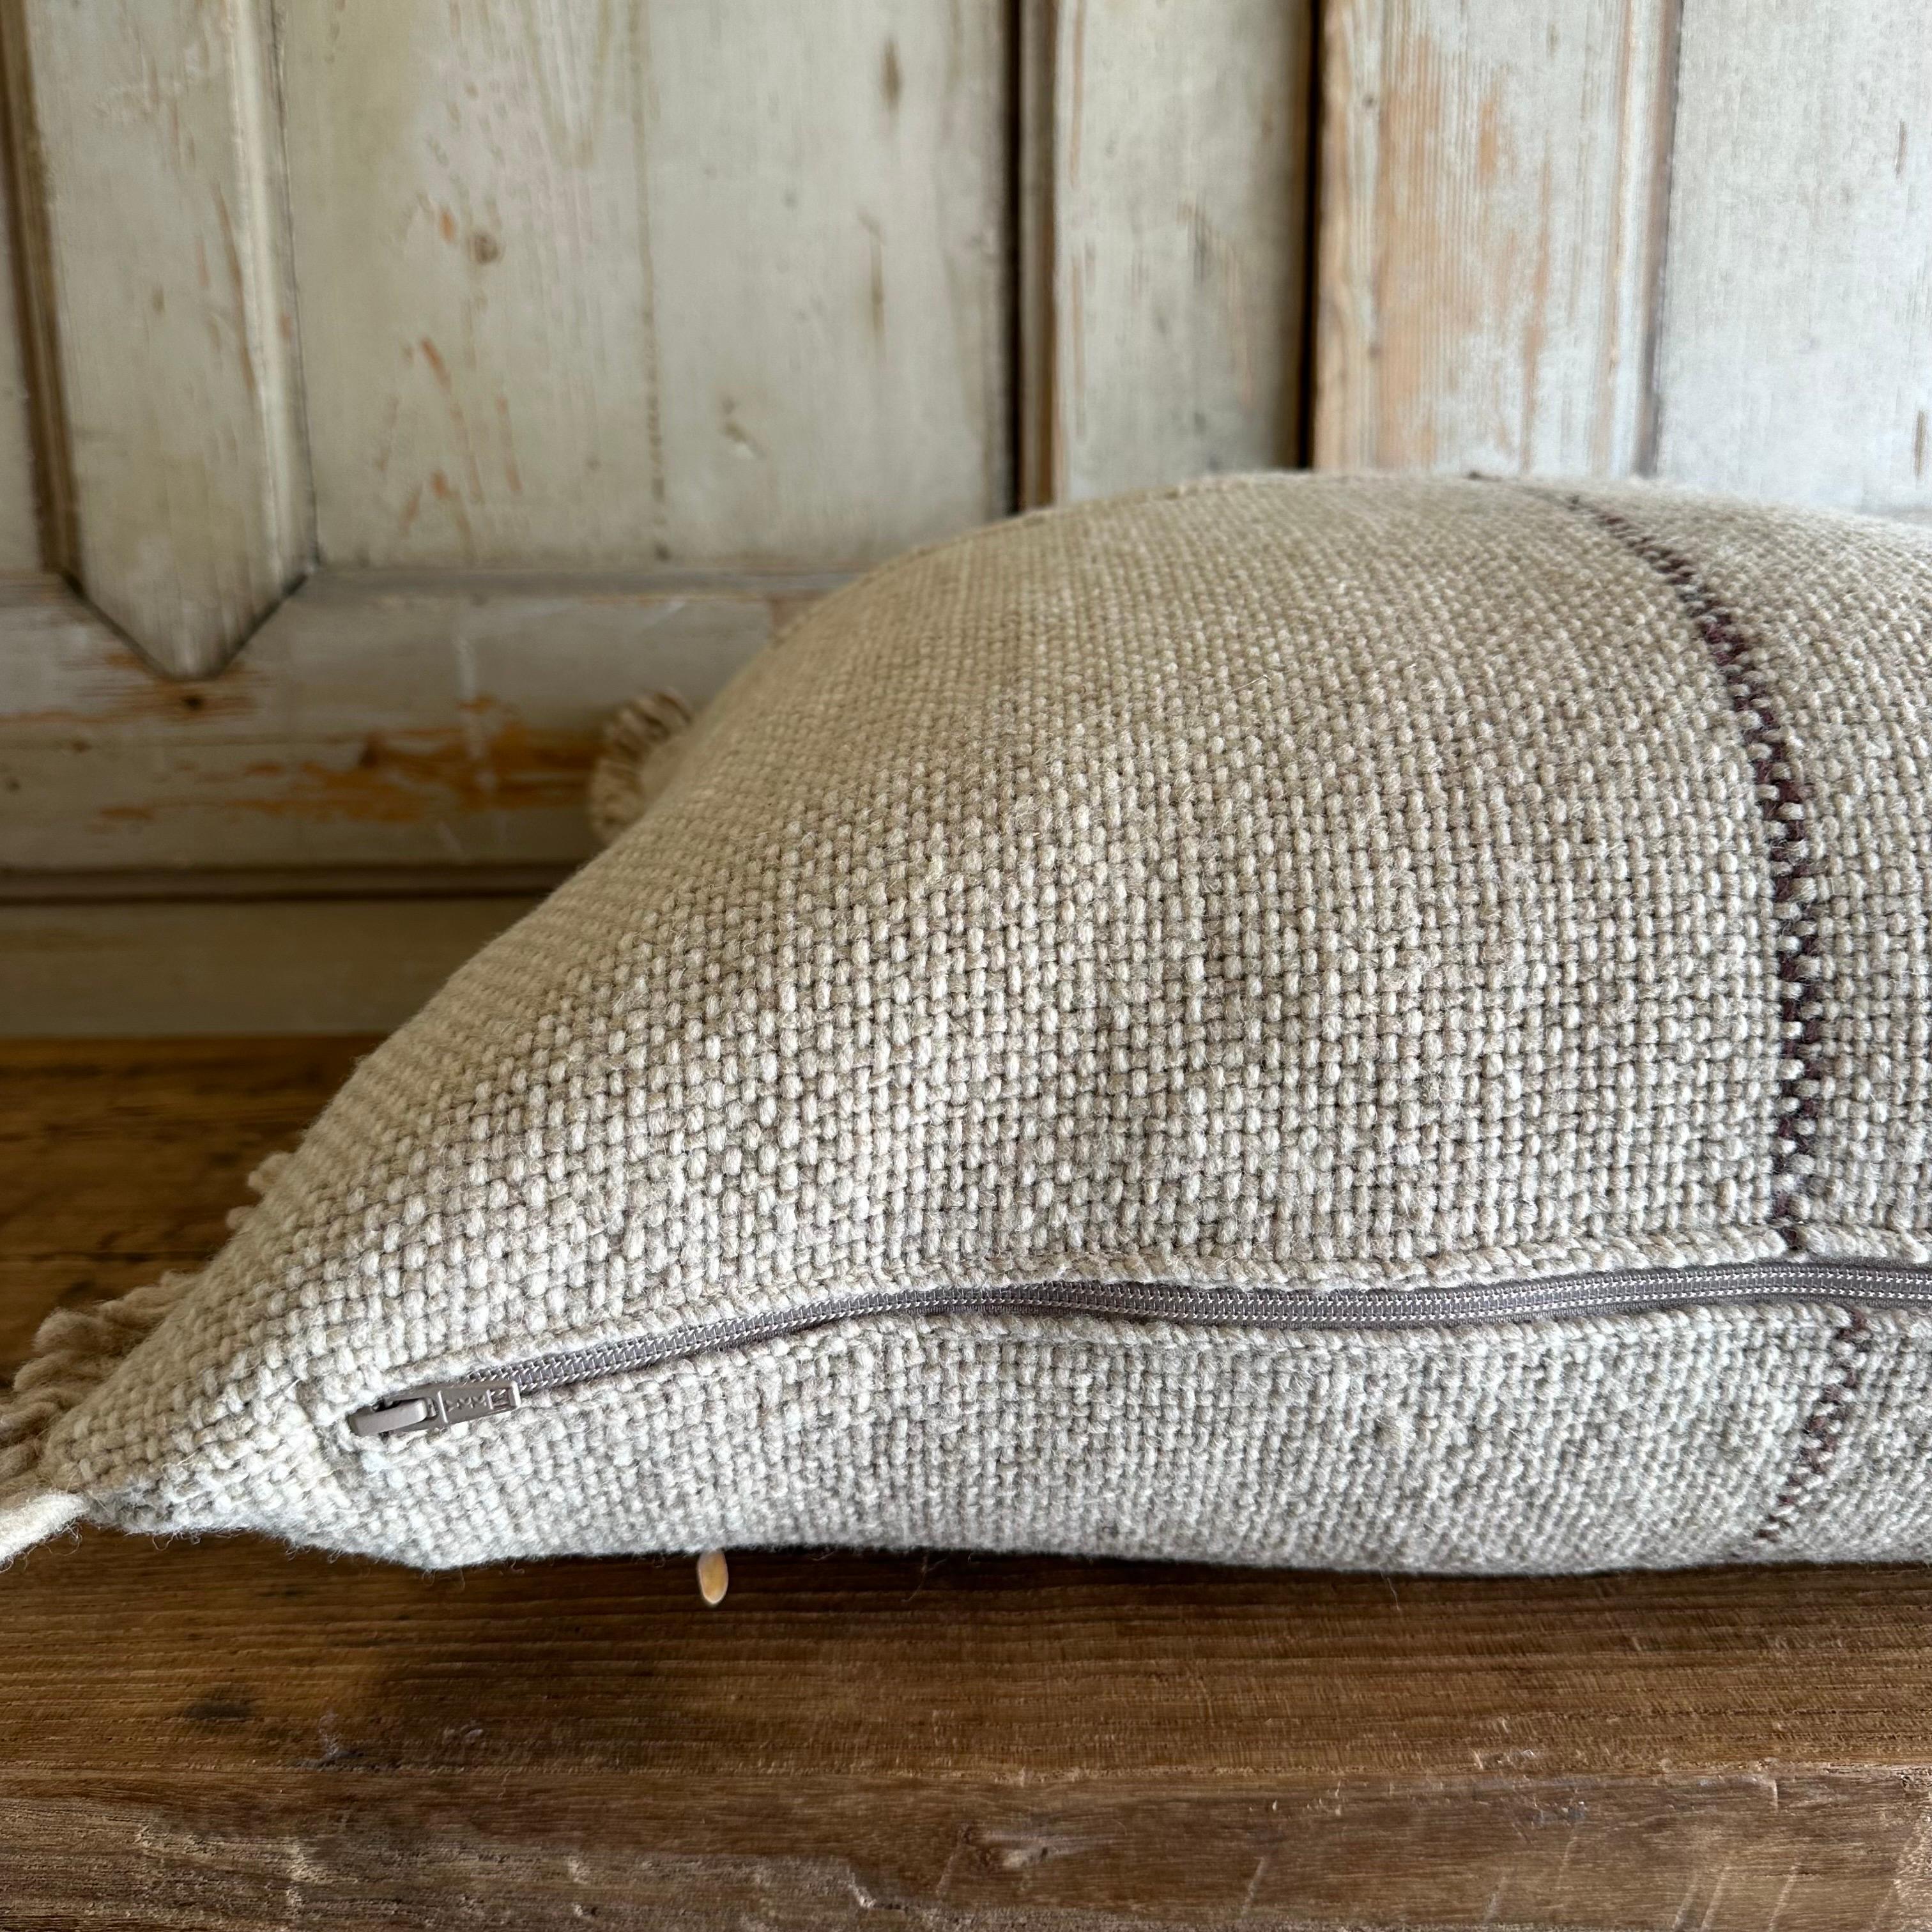 Wool Alpaca accent pillow from . A beautiful natural pillow with brown stripe and fringe. Large wood yarns woven to create a beautiful texture. Hidden zipper closure. Due to the unique yarns, the color varies which are normal and to be expected. If